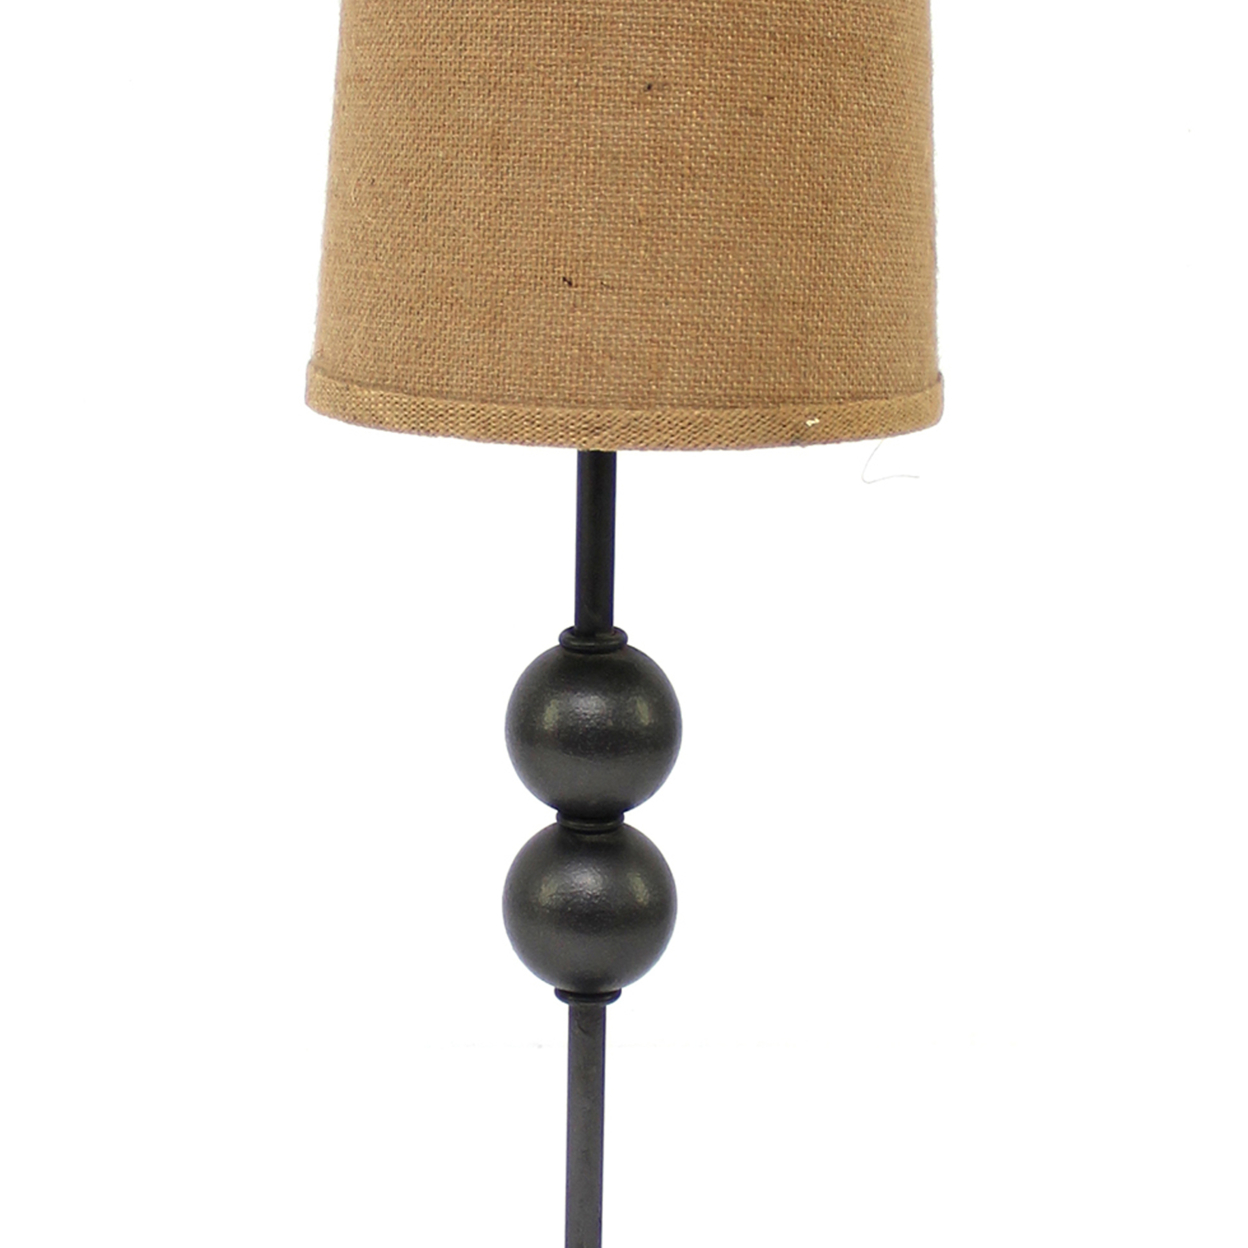 Metal Spindle Design Table Lamp With Cone Shade And Round Base, Black- Saltoro Sherpi